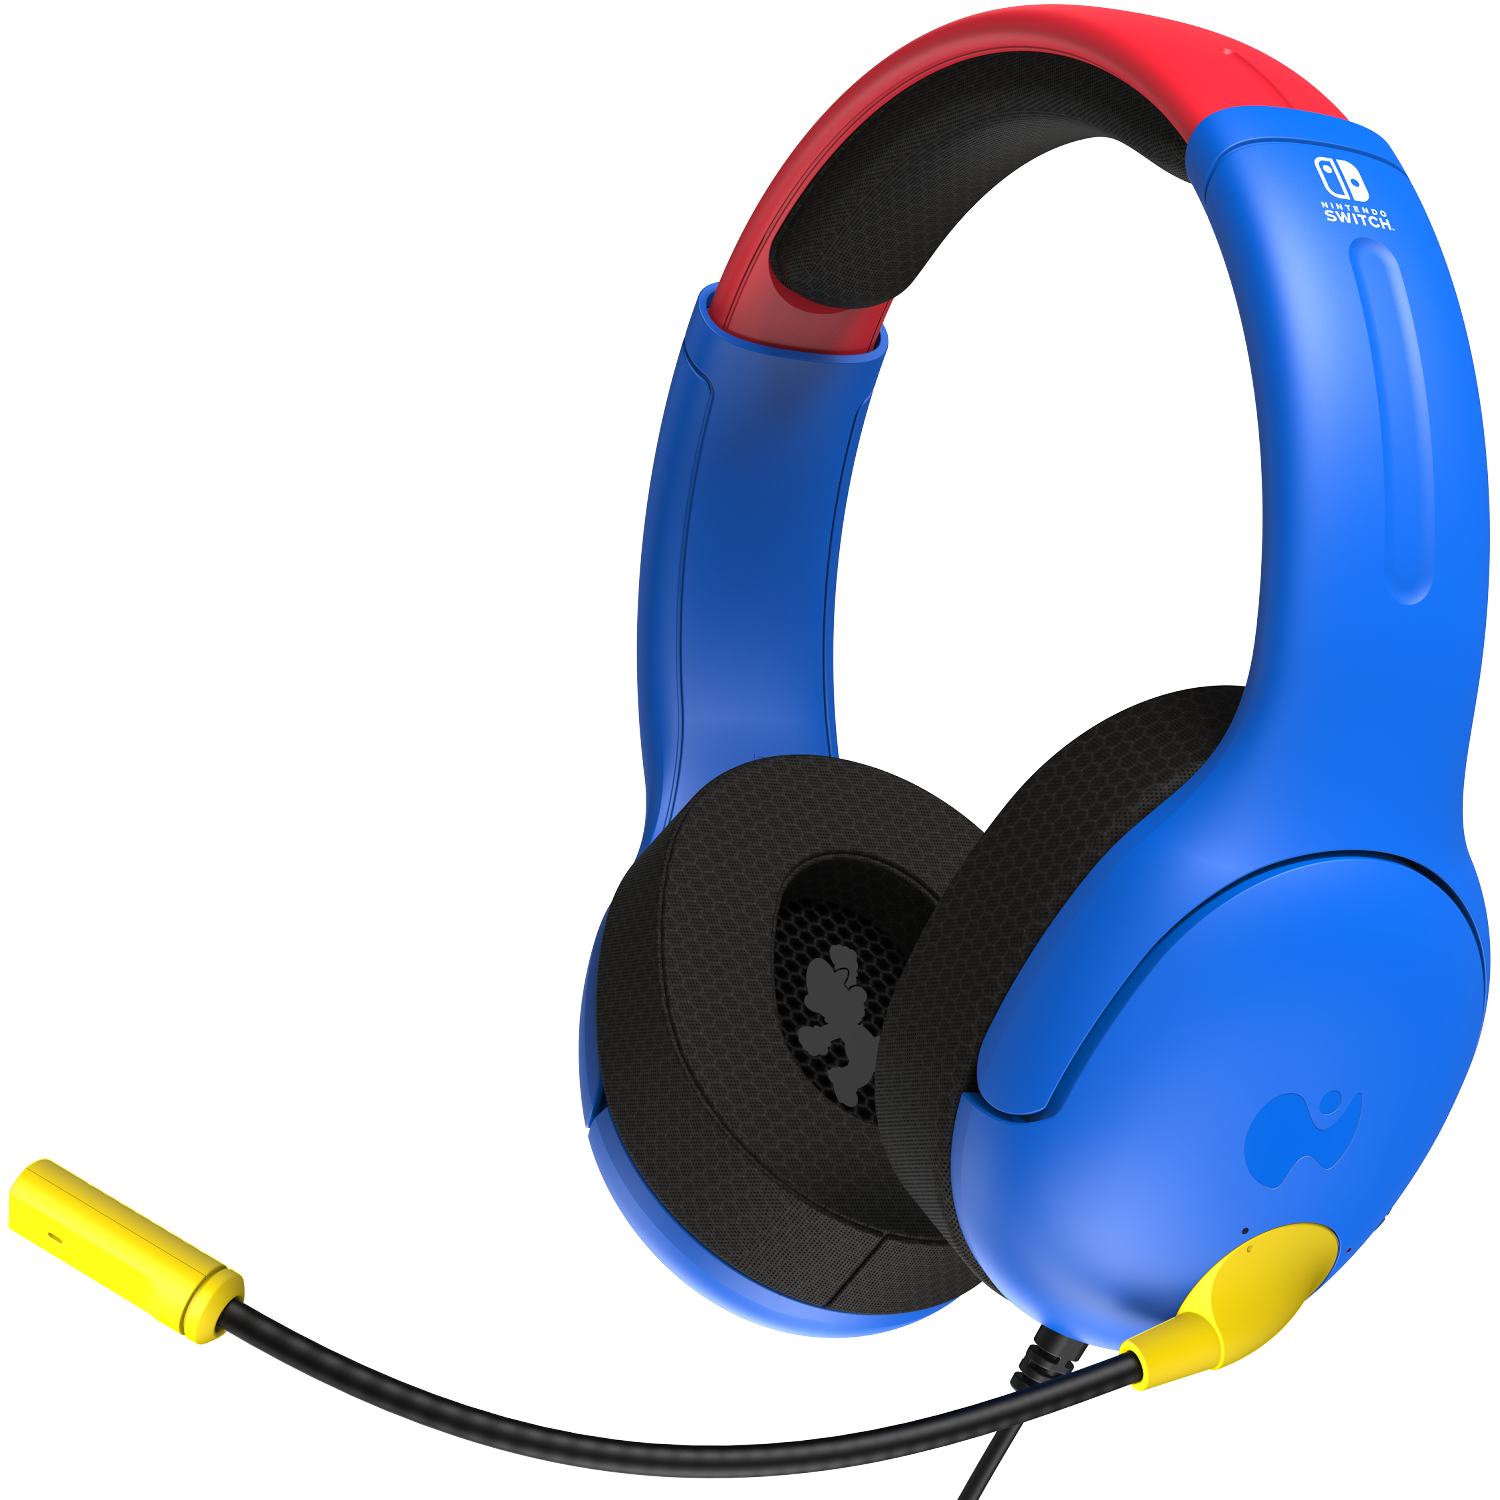 Nintendo Switch Oled AIRLITE Wired Headset by PDP